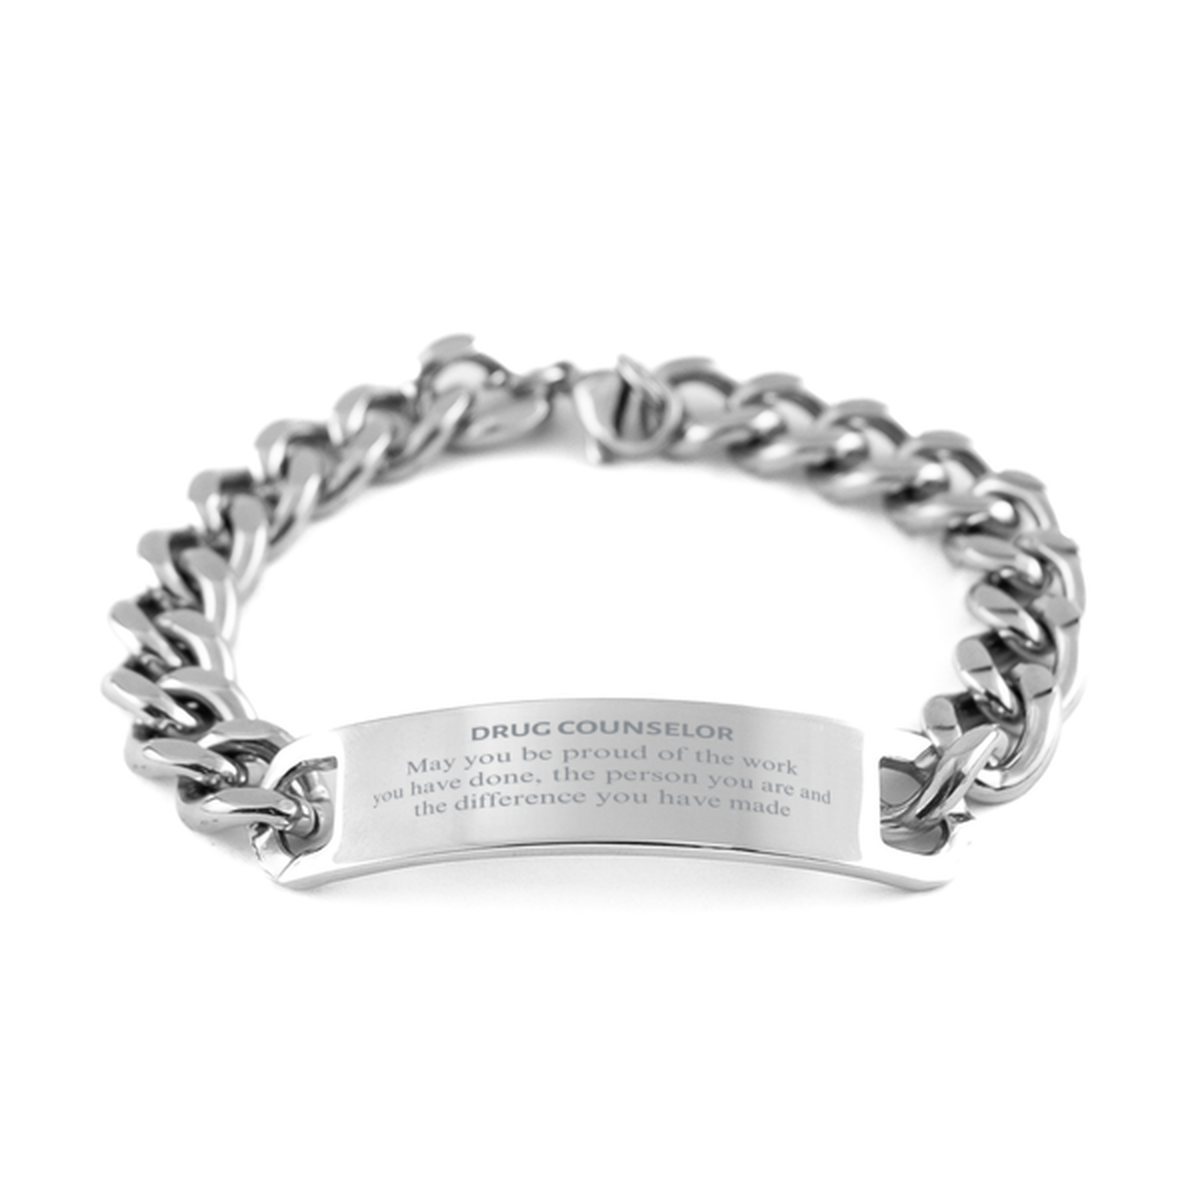 Drug Counselor May you be proud of the work you have done, Retirement Drug Counselor Cuban Chain Stainless Steel Bracelet for Colleague Appreciation Gifts Amazing for Drug Counselor